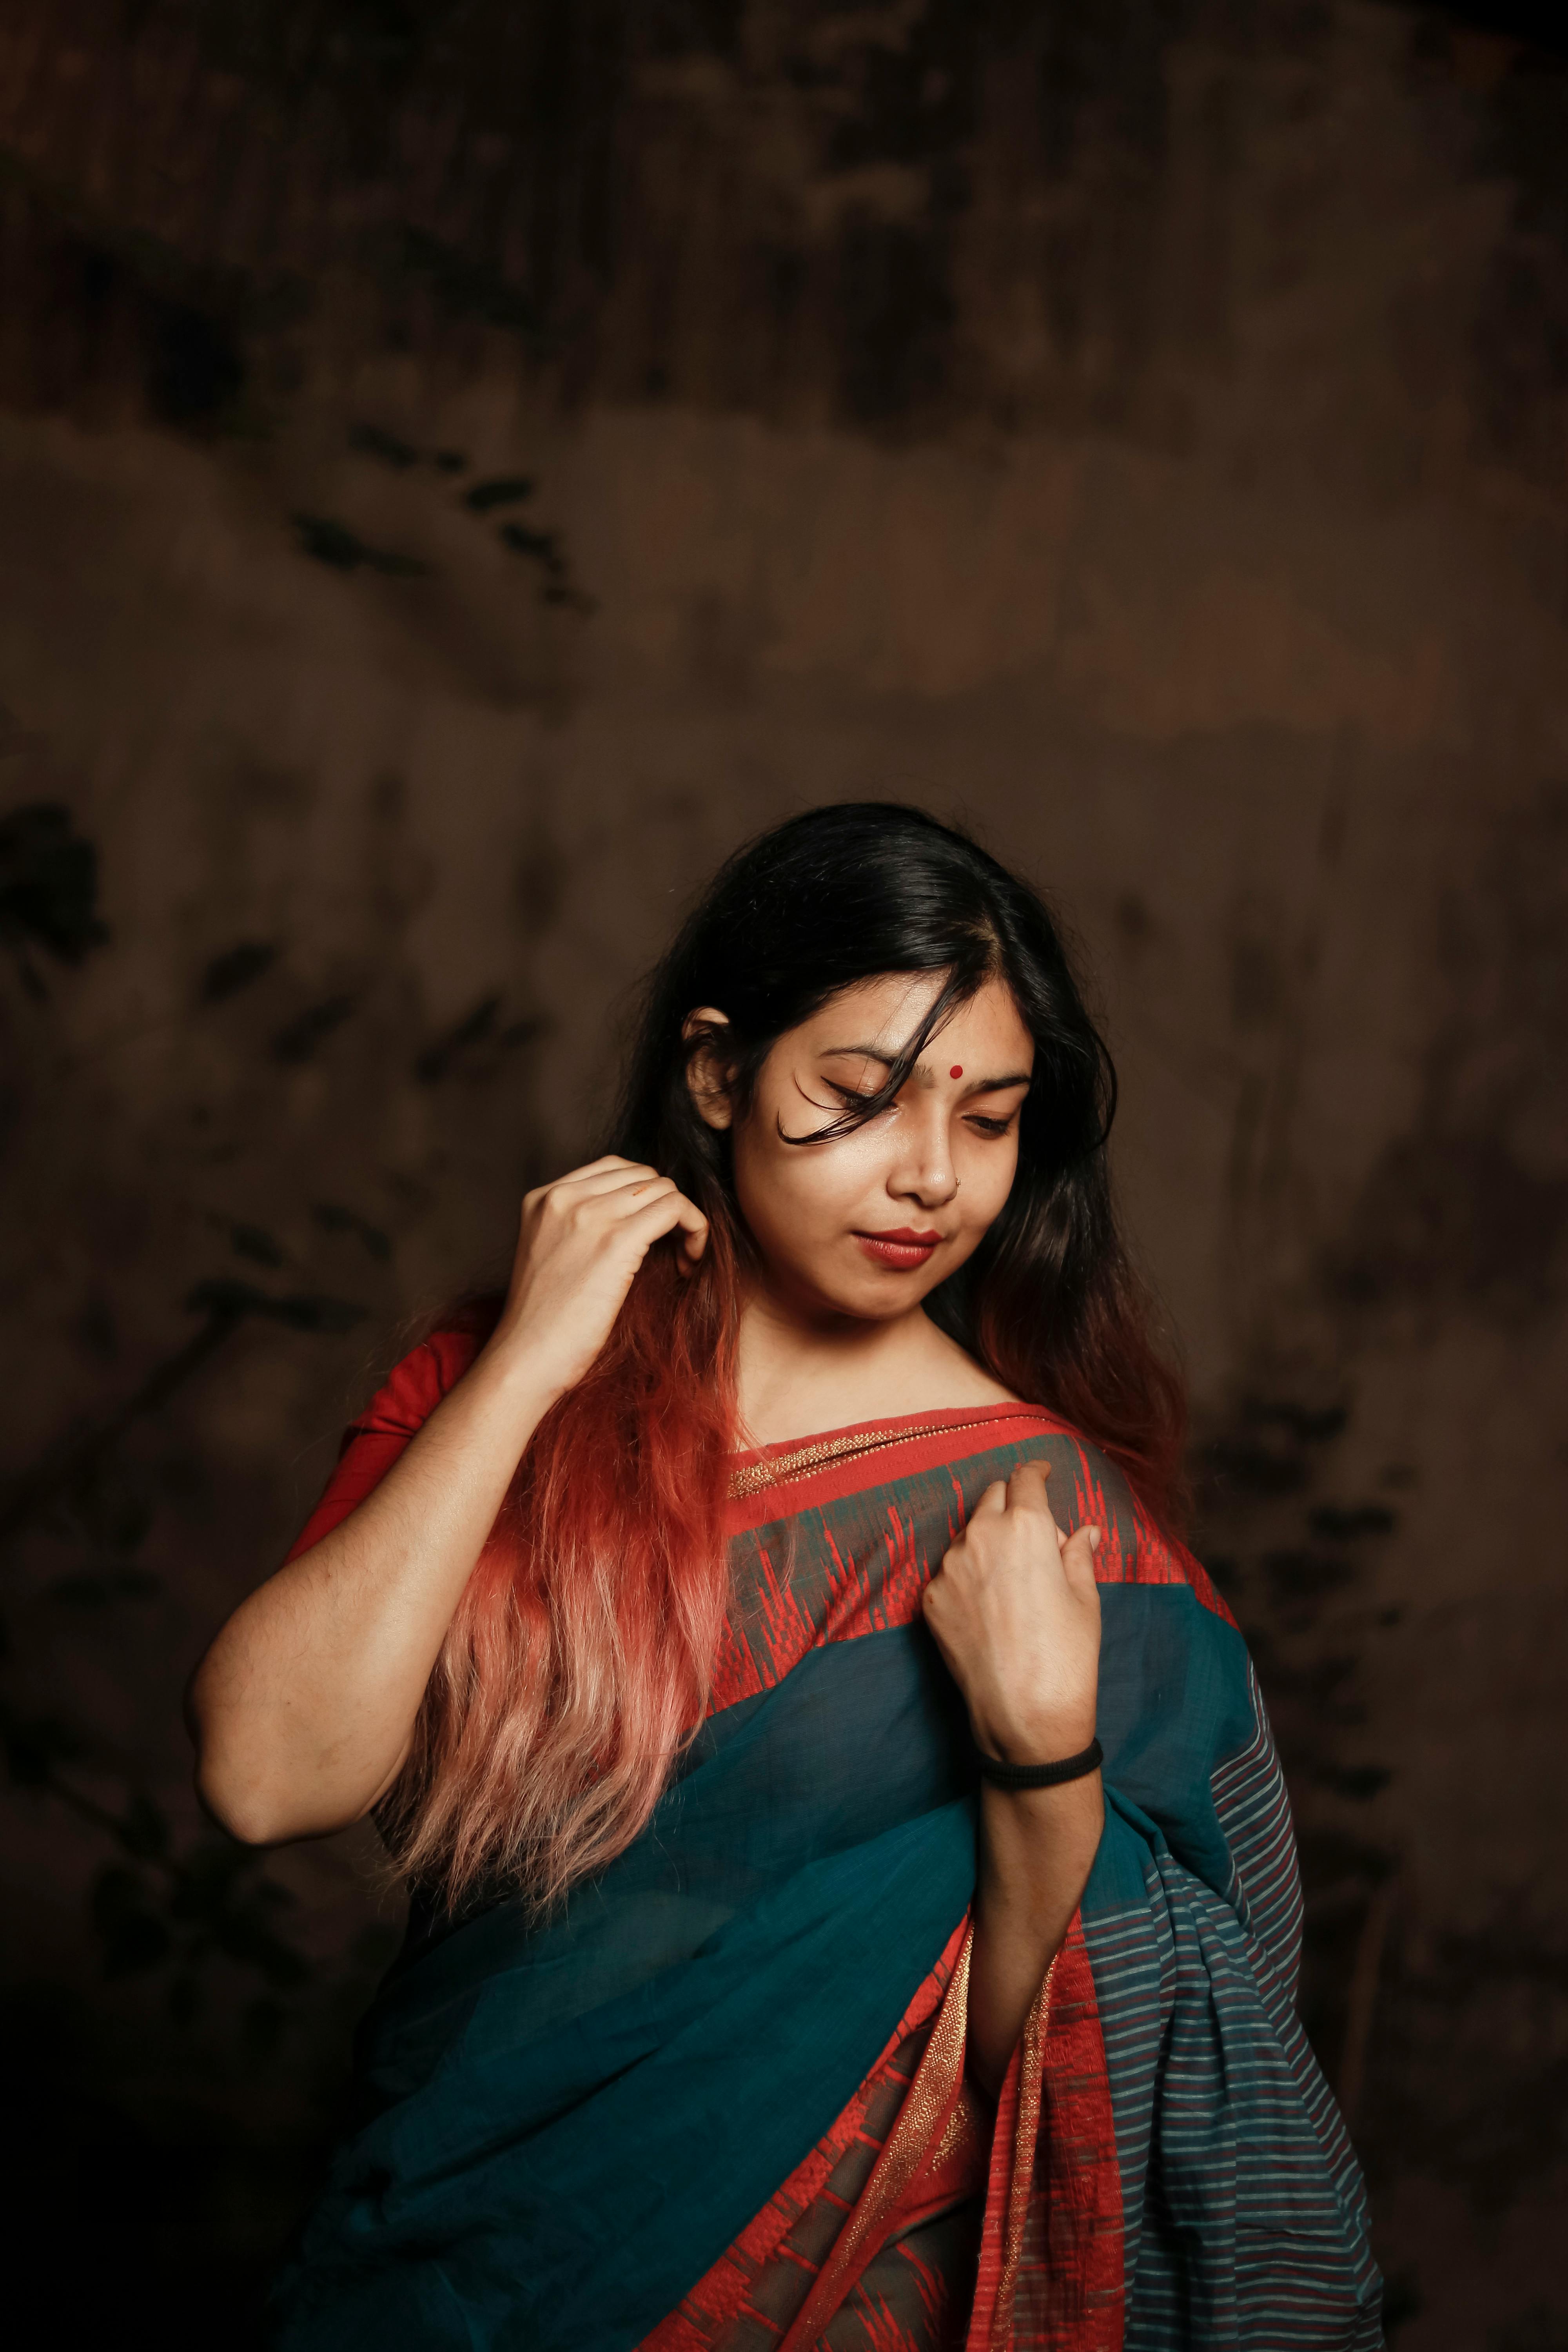 Woman In Saree Pictures  Download Free Images on Unsplash